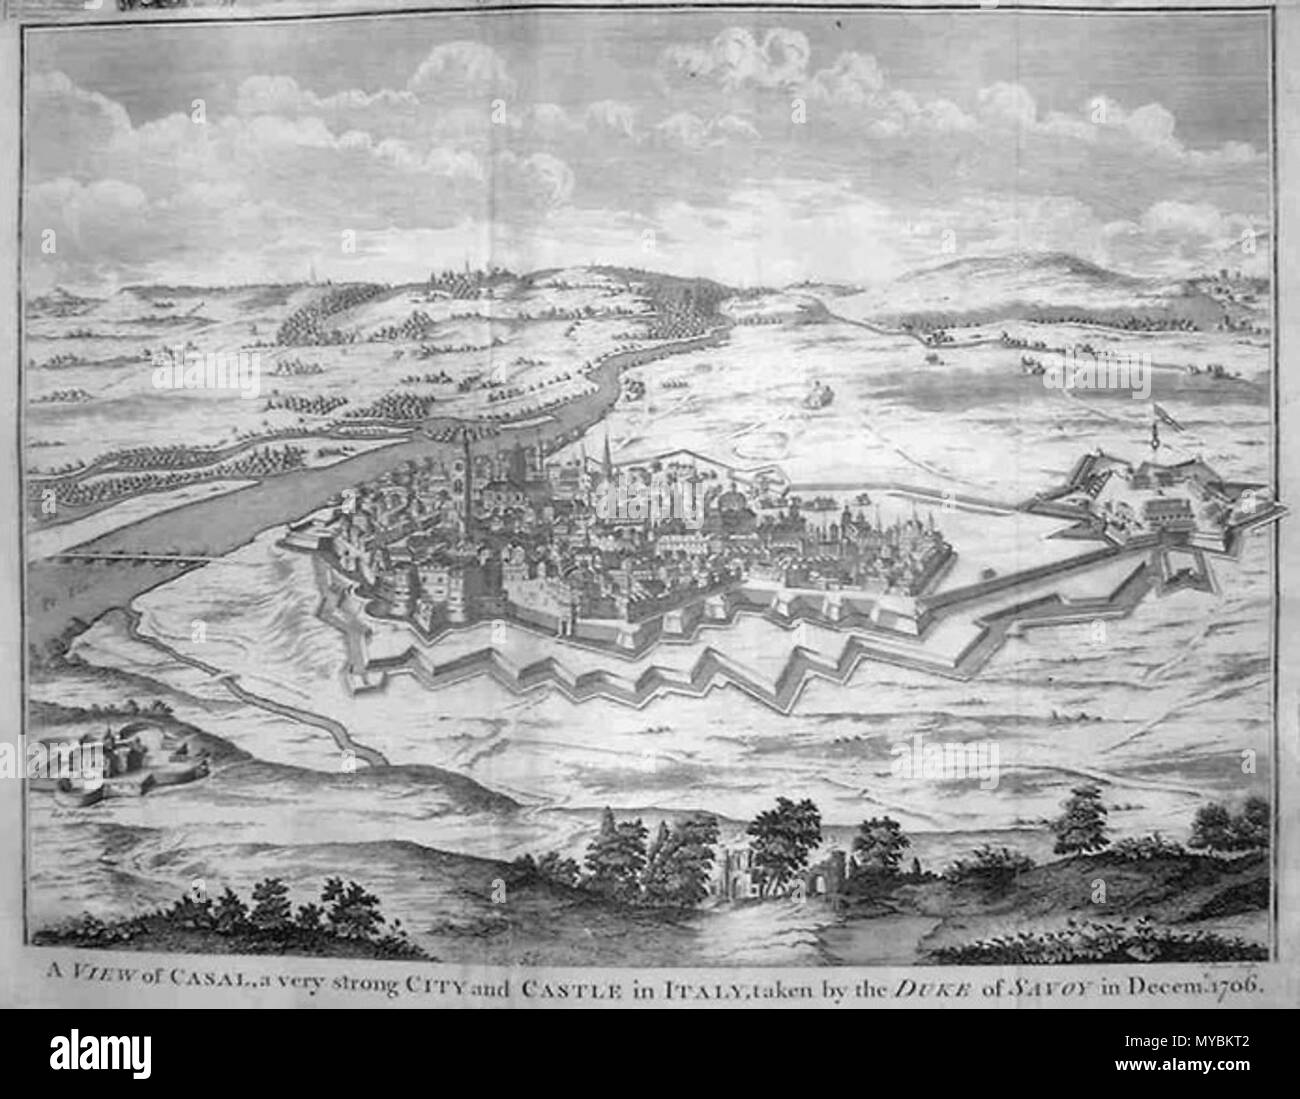 . A View of Casal (today Casale Monferrato) ‘a very strong city & castle in Italy taken by the Duke of Savoy in Decem. 1706’, copper engraving, 35 x 48cm . 1745, London. Basire-Rapin 100 Casal-1745 Stock Photo